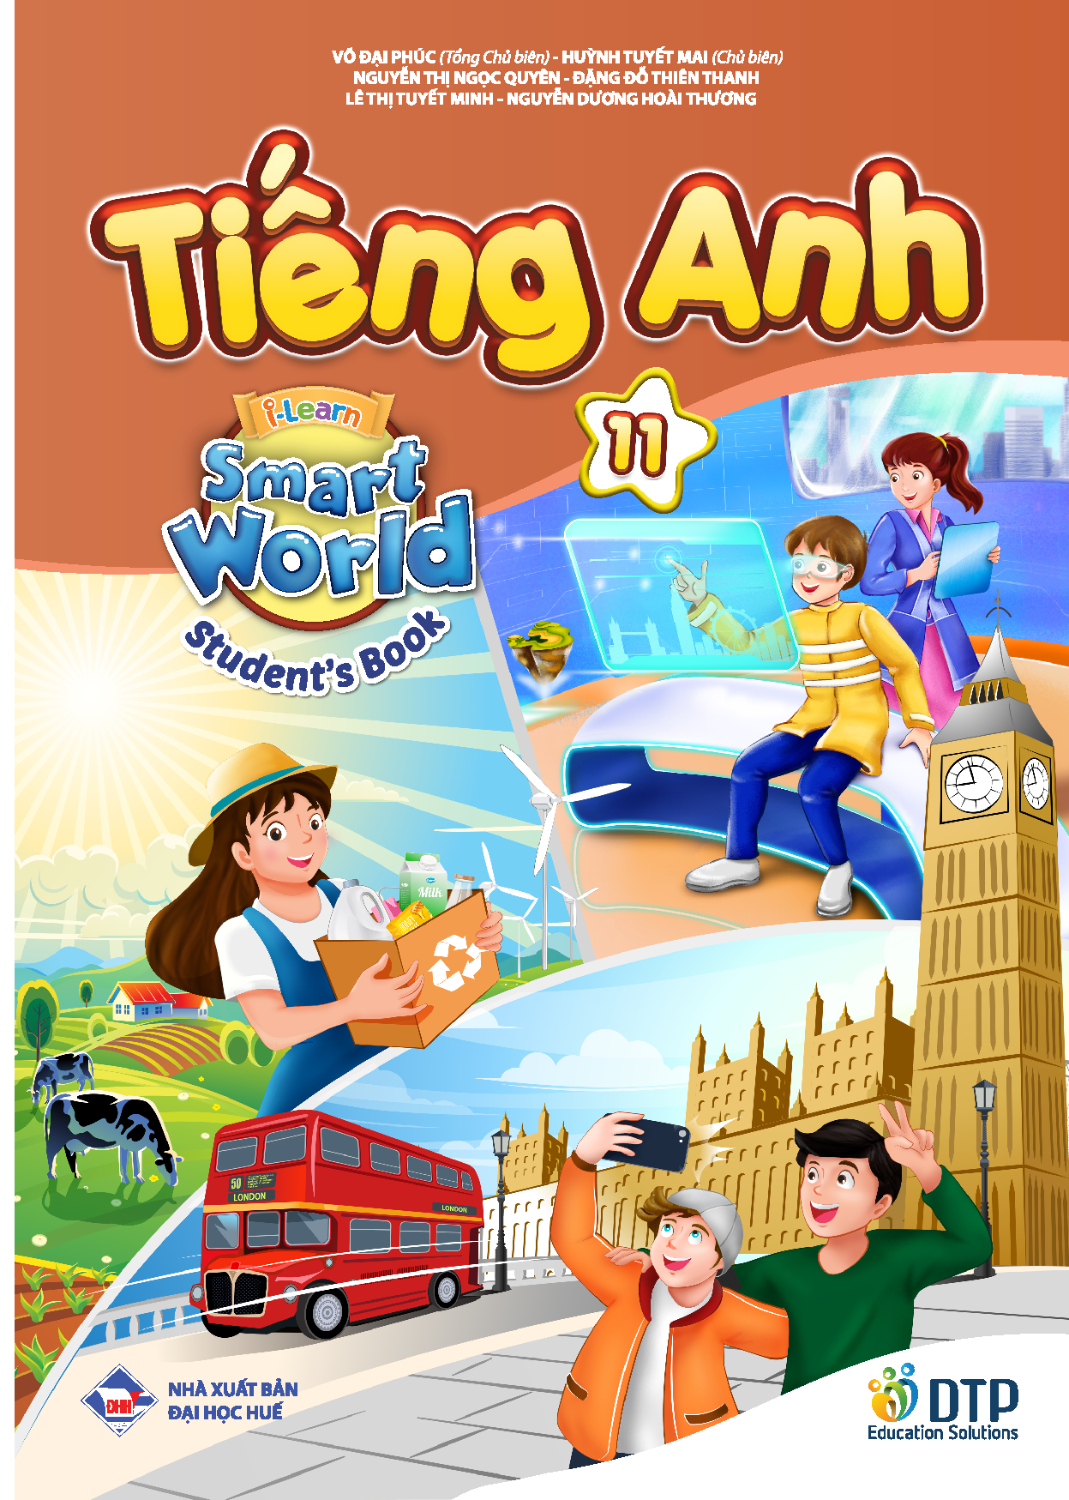 Tiếng Anh i-Learn Smart World (Cấp 3)